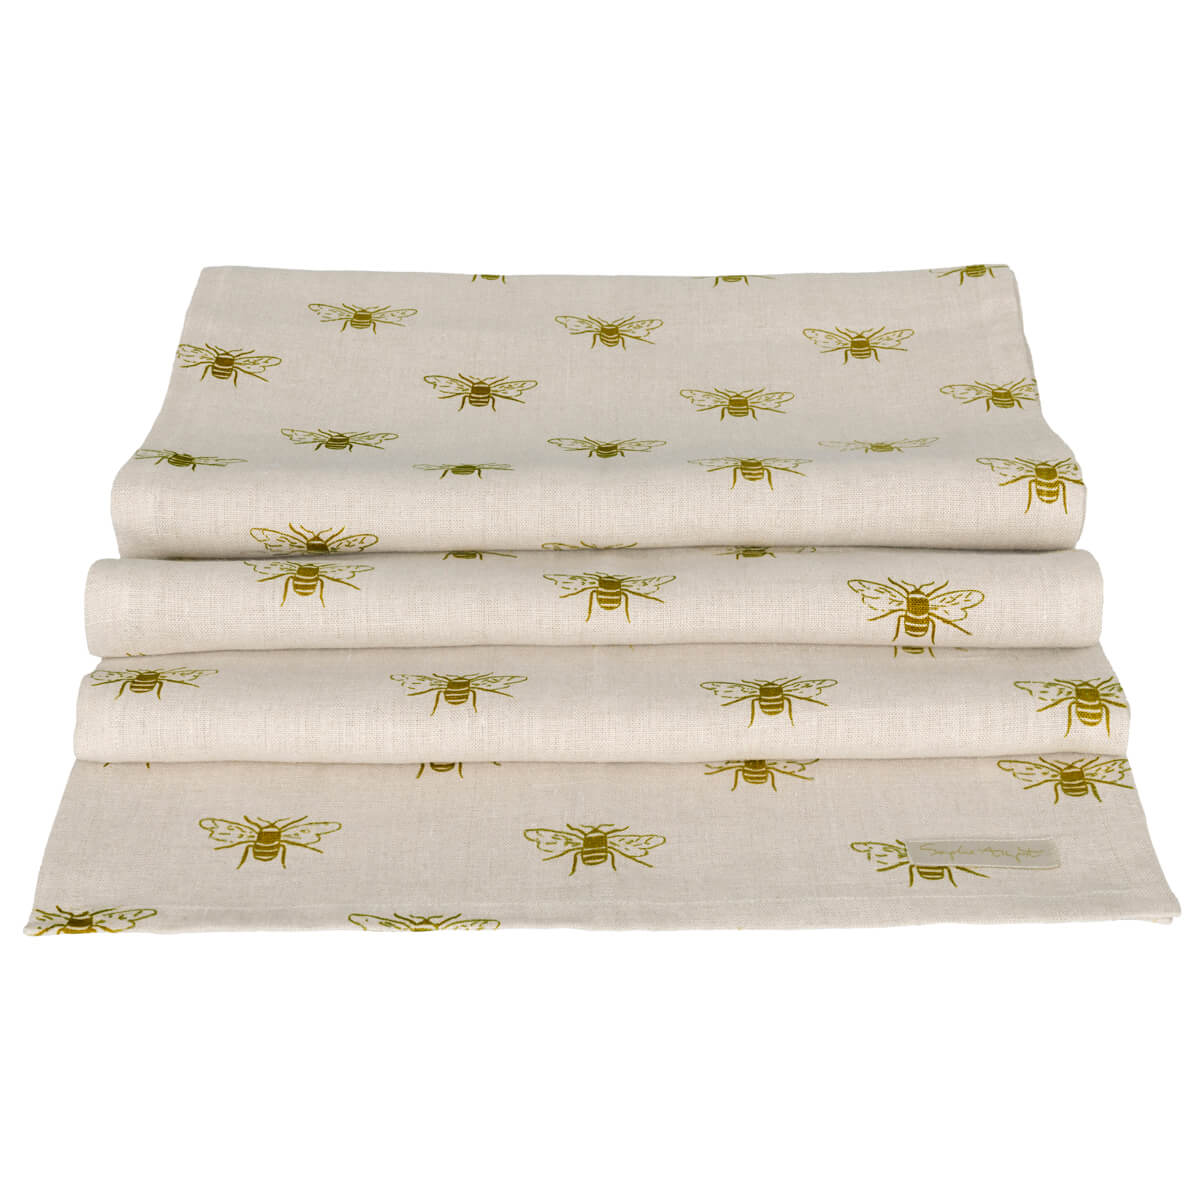 neutral table runner made from 100% linen with mustard gold Sophie Allport bees design